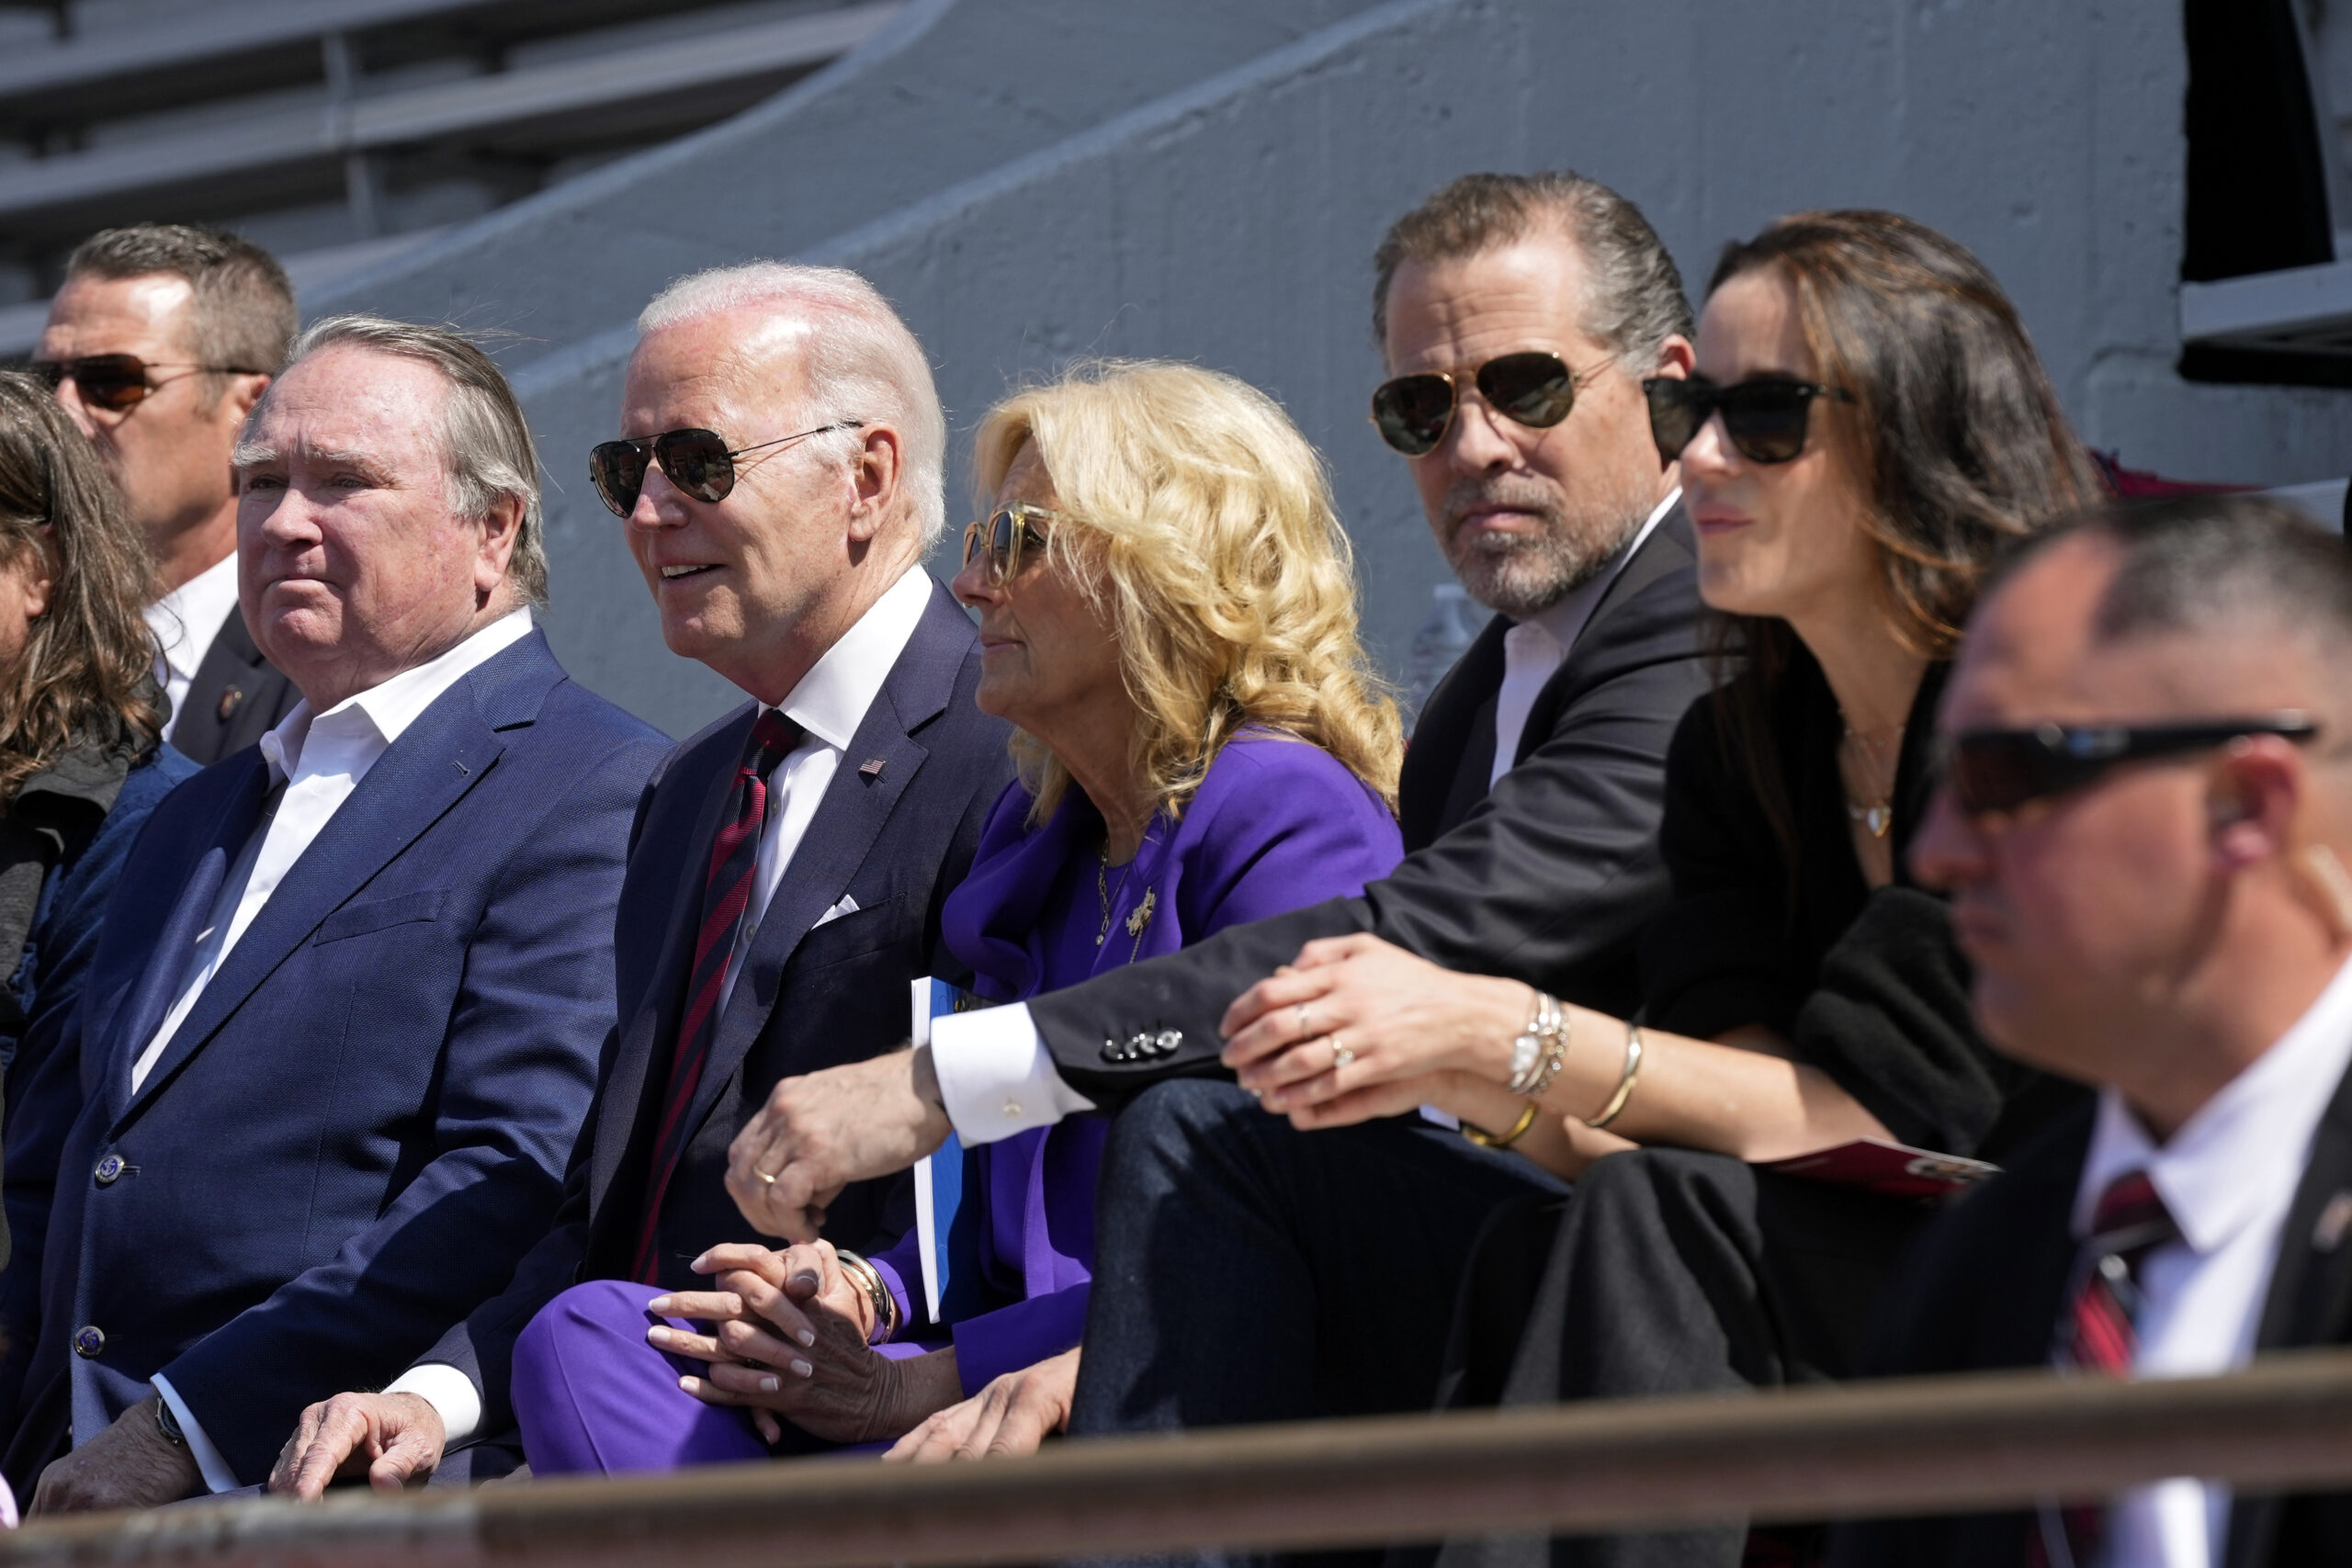 President Joe Biden attends his granddaughter Maisy Biden's commencement ceremony with first lady J...